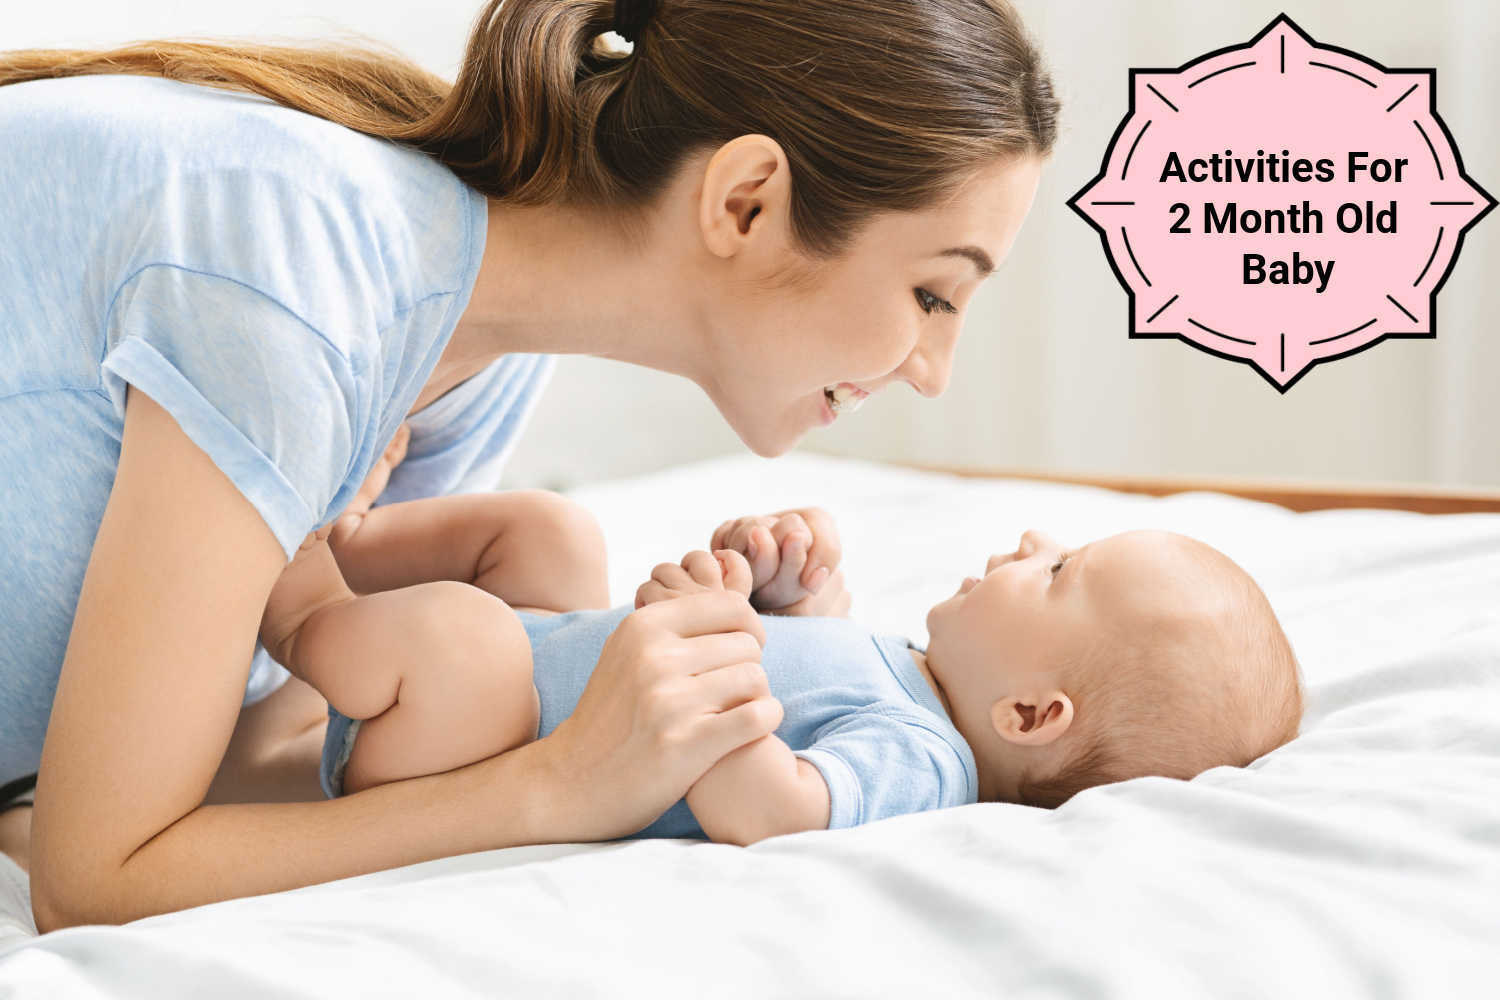 Activities For a 2 Month Old Baby